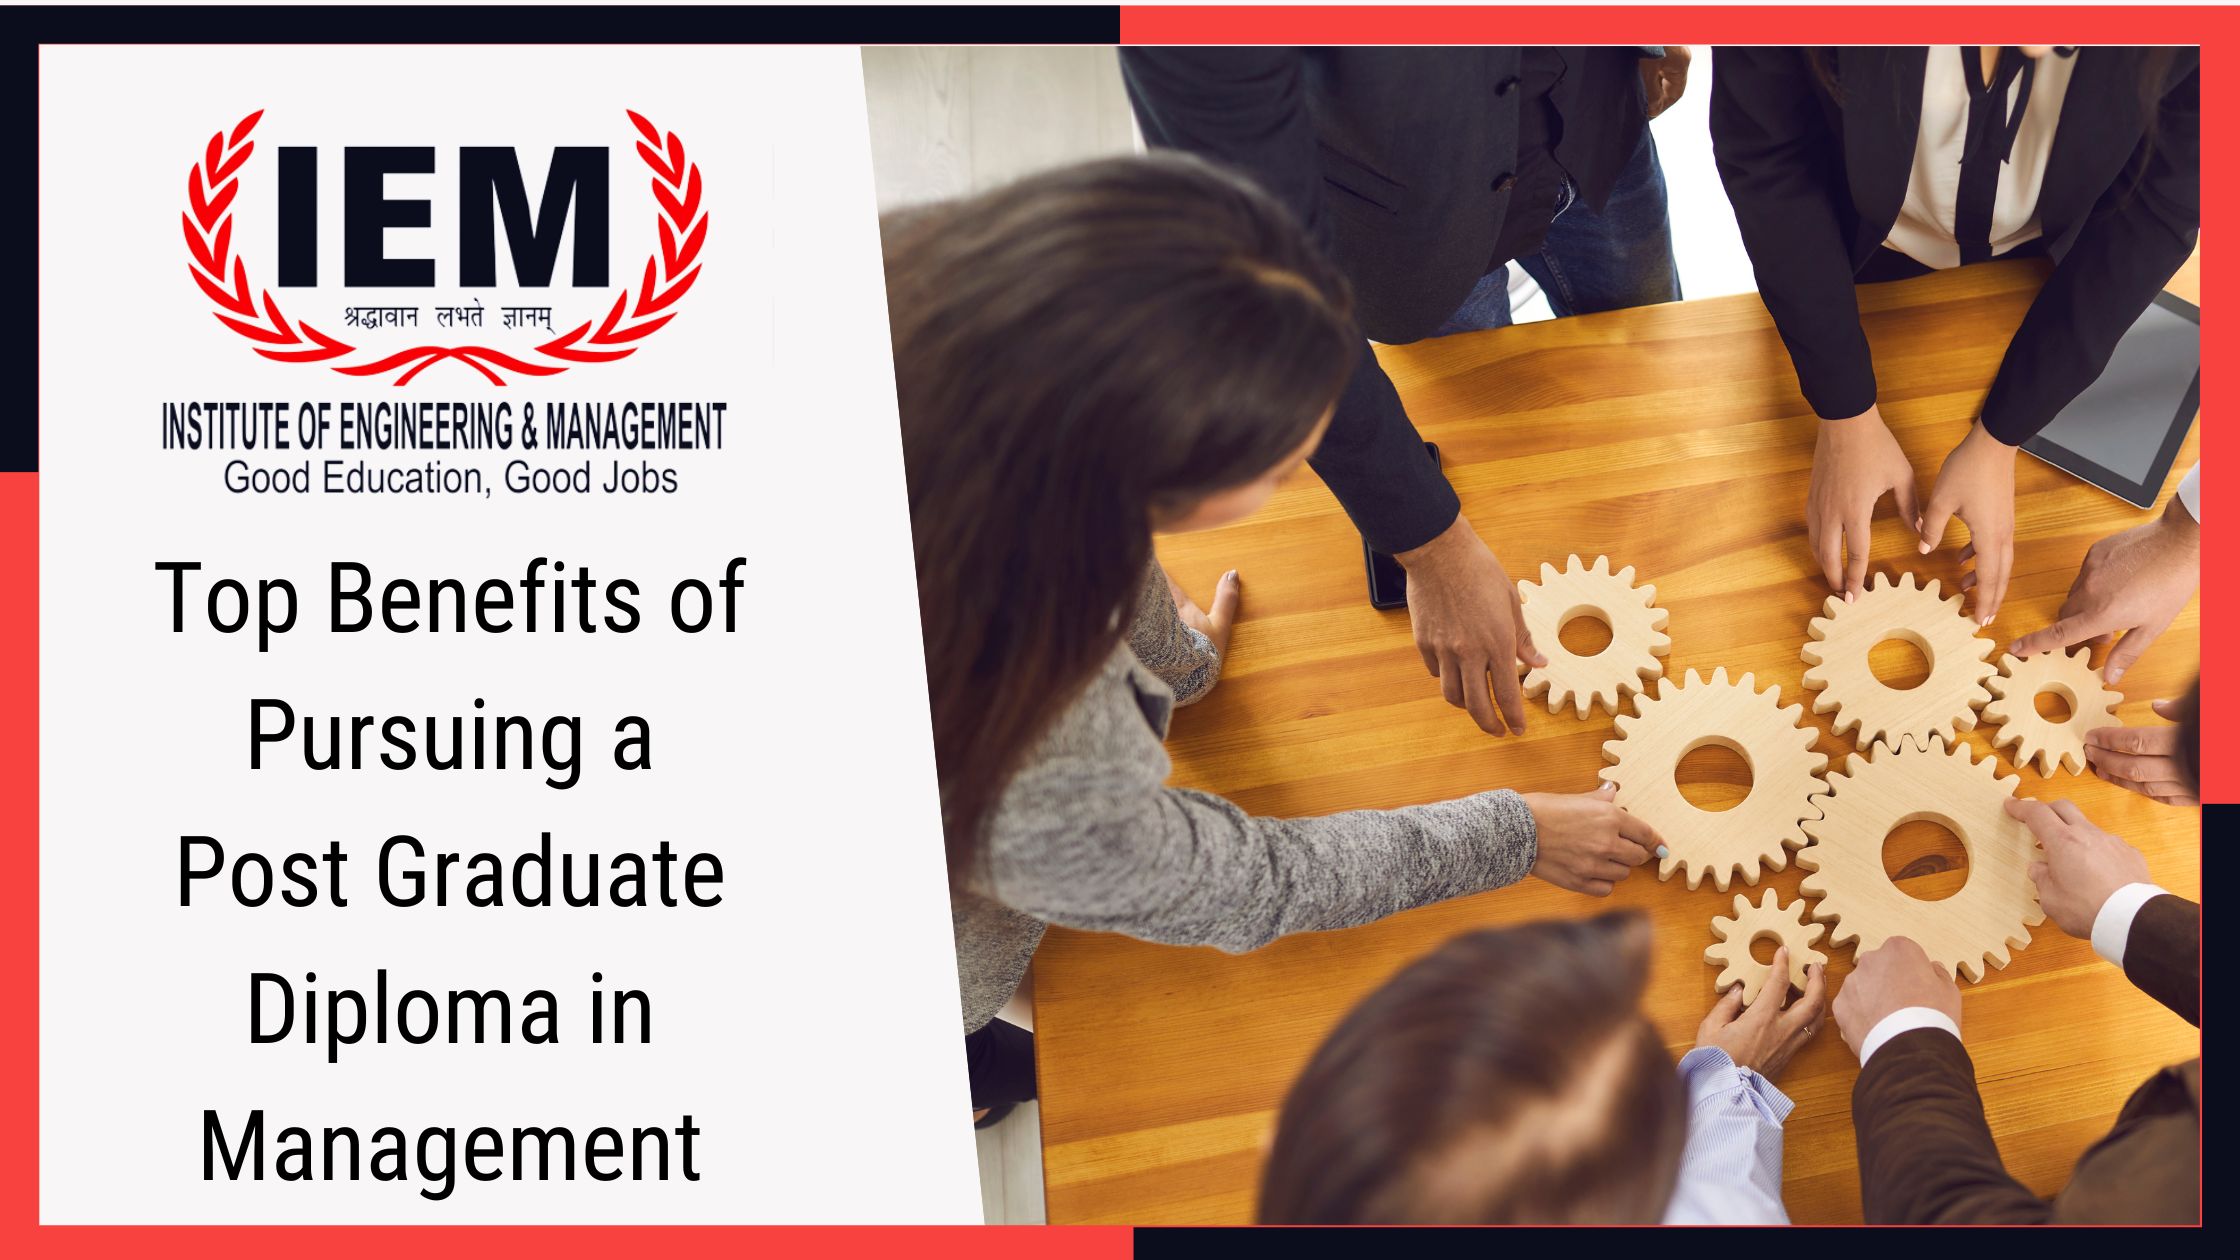 Top Benefits of Pursuing a Post Graduate Diploma in Management